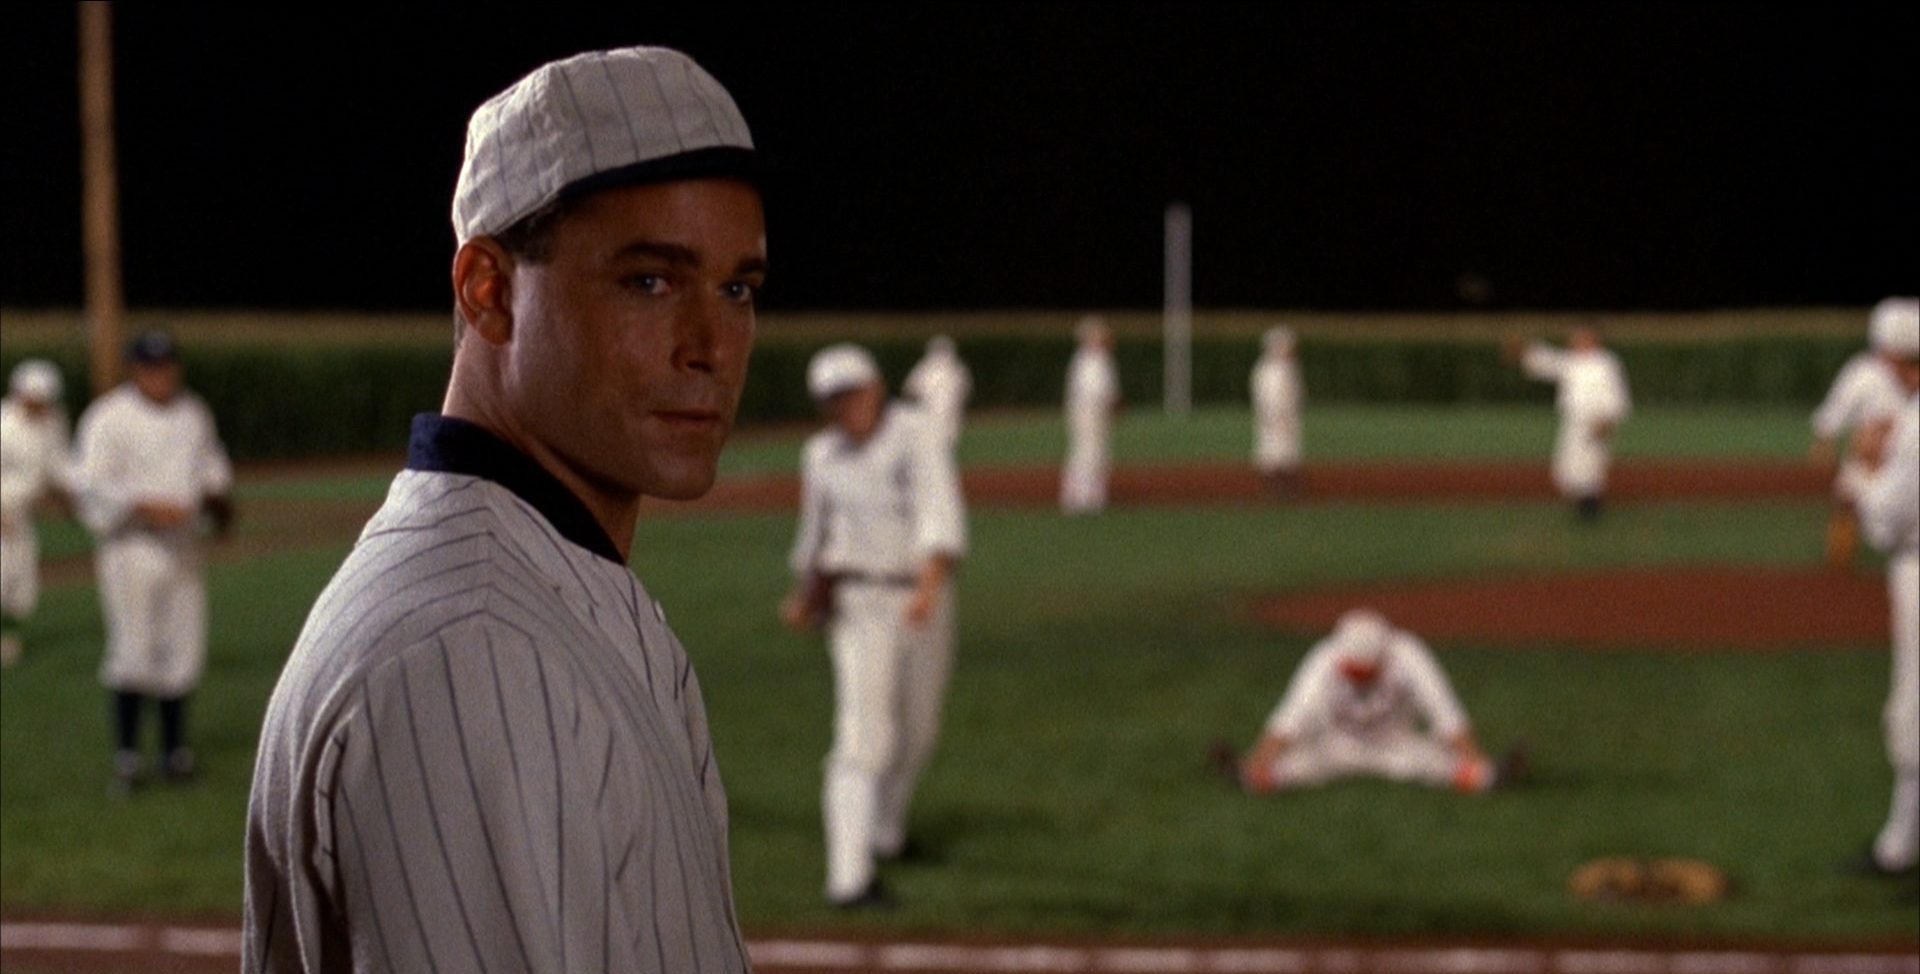 Is Field of Dreams a True Story? Is the Movie Based on Real MLB Player?